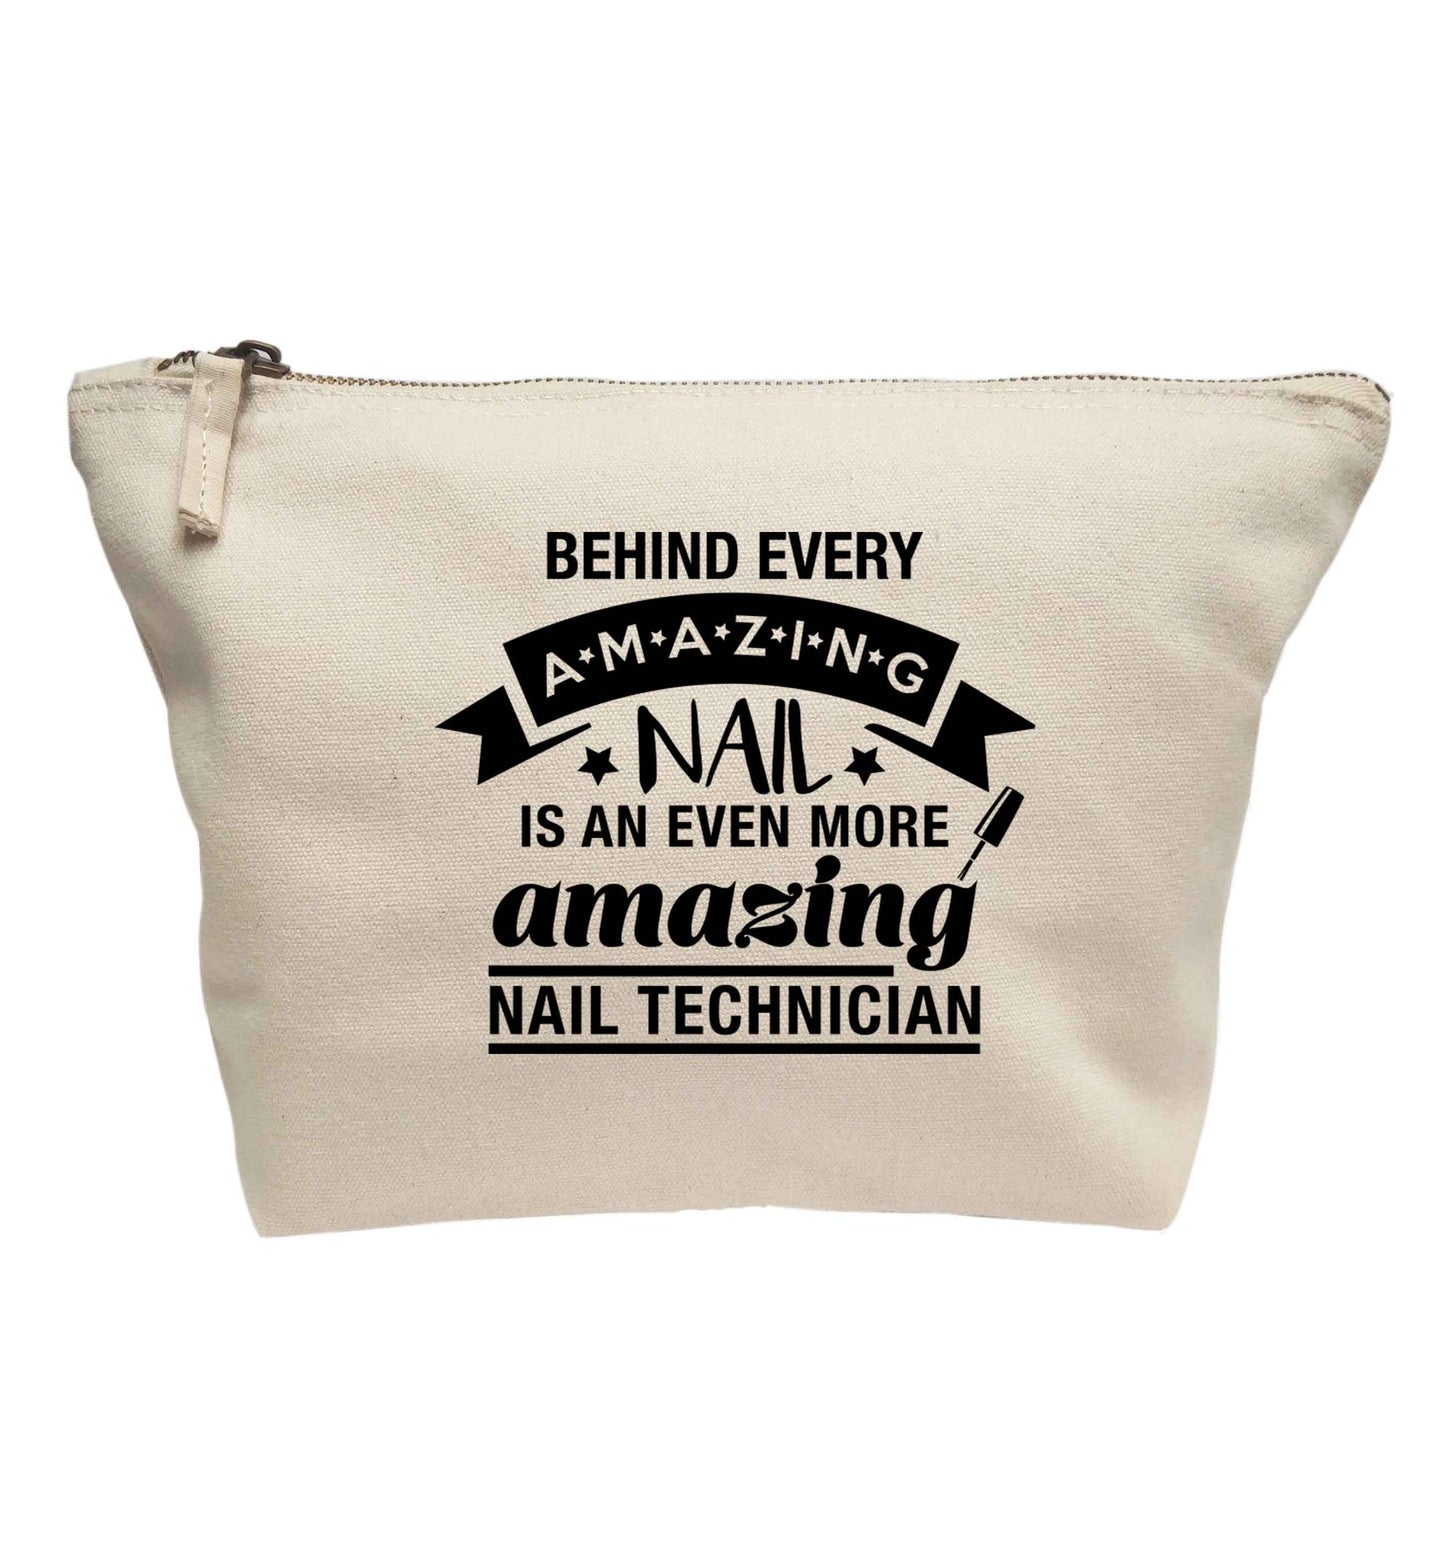 Behind every amazing nail is an even more amazing nail technician | Makeup / wash bag